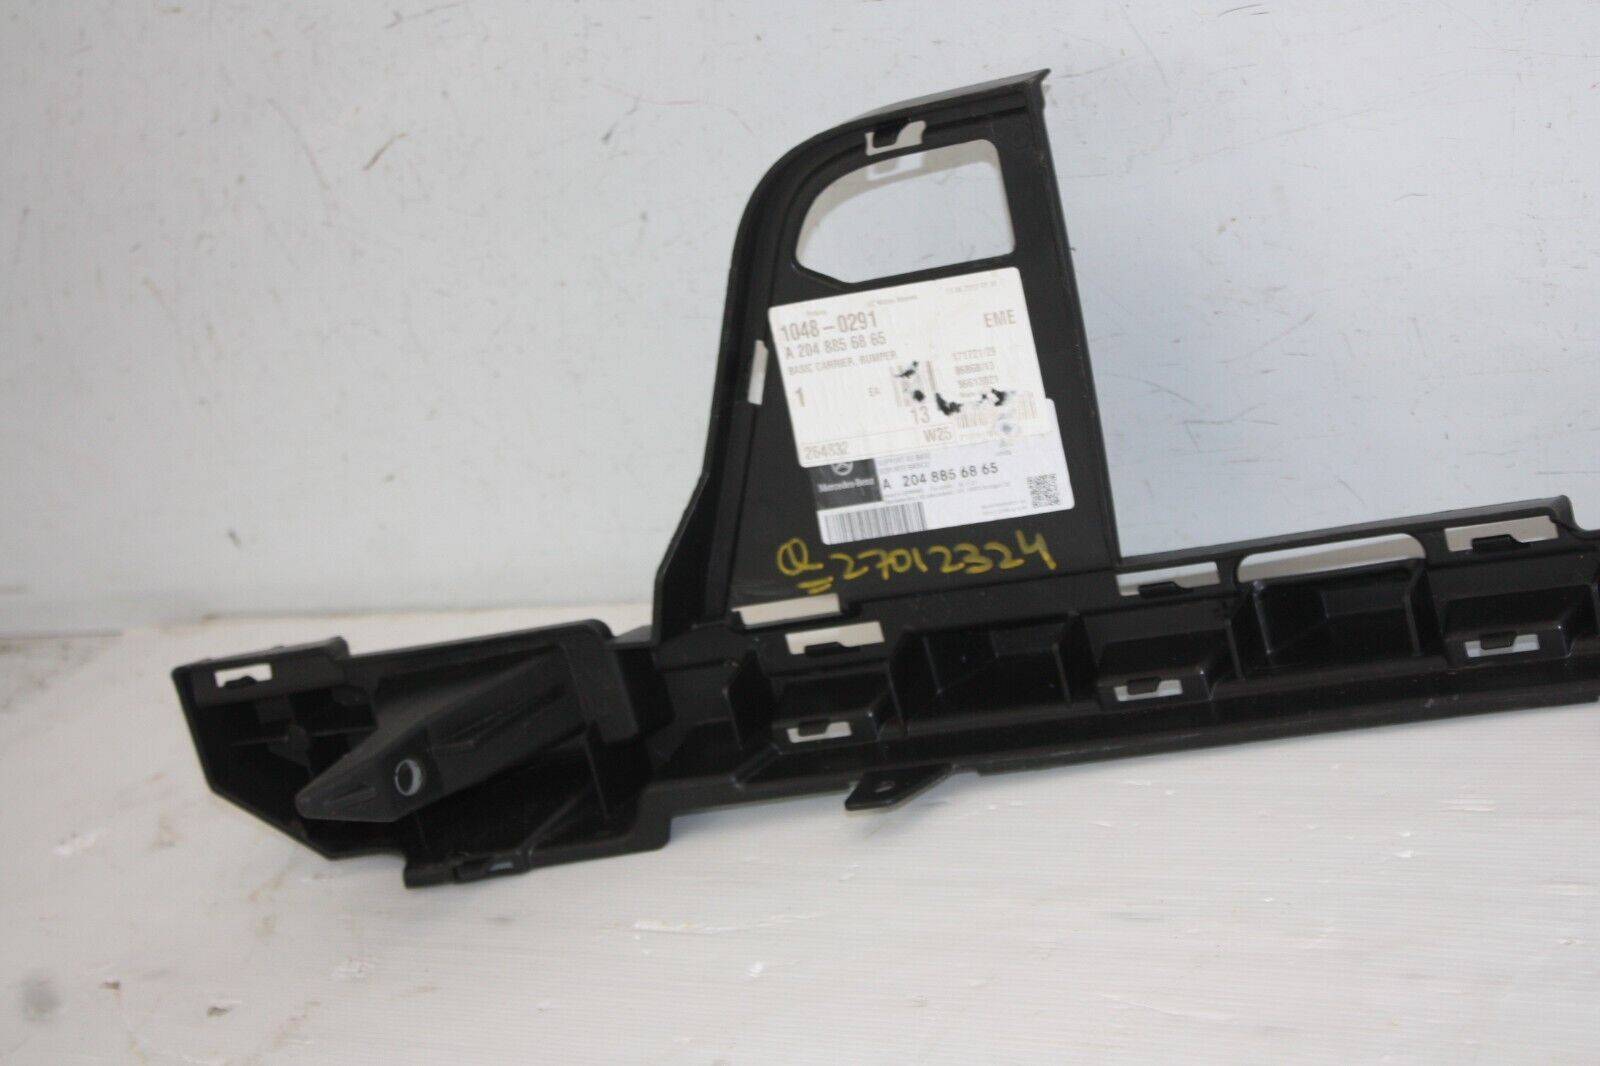 Mercedes-C-Class-W204-Front-Bumper-Support-Bracket-2011-to-2014-A2048856865-175589568058-16